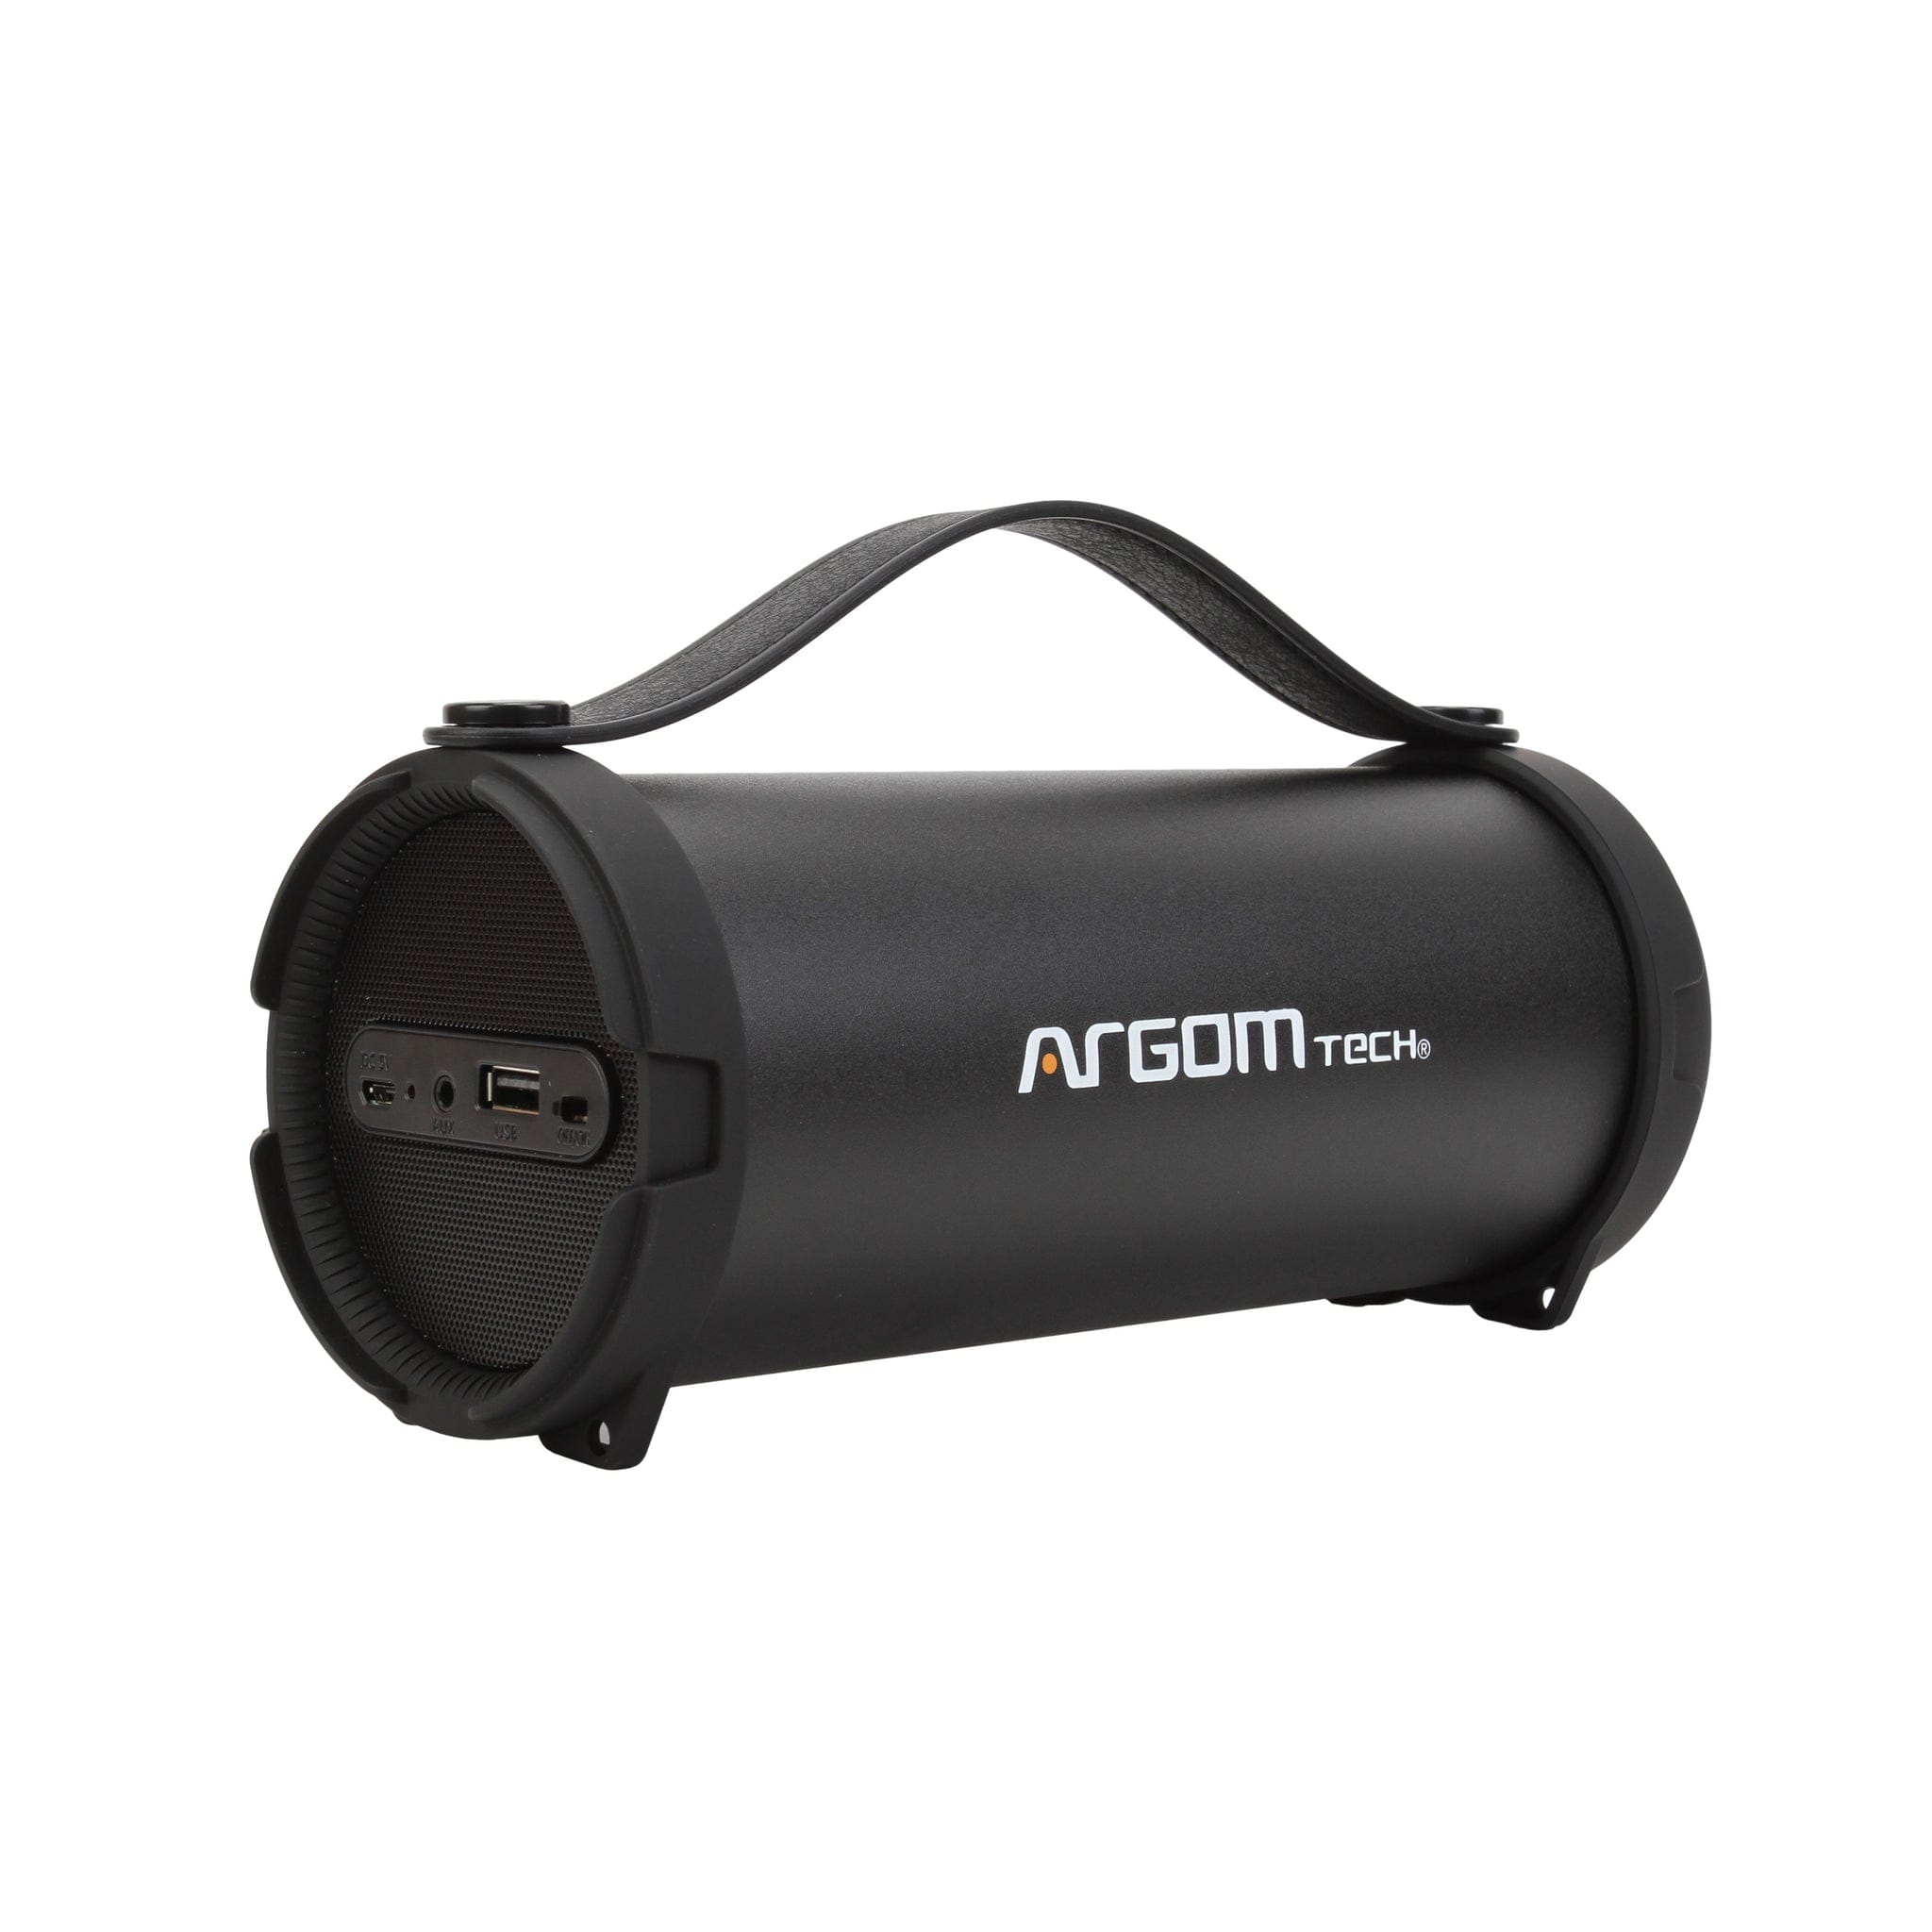 Argom Bluetooth Bazooka Air Speaker Perfect speaker for your everyday use. Compact, yet superior in sound with 6000mW RMS-SP-3100